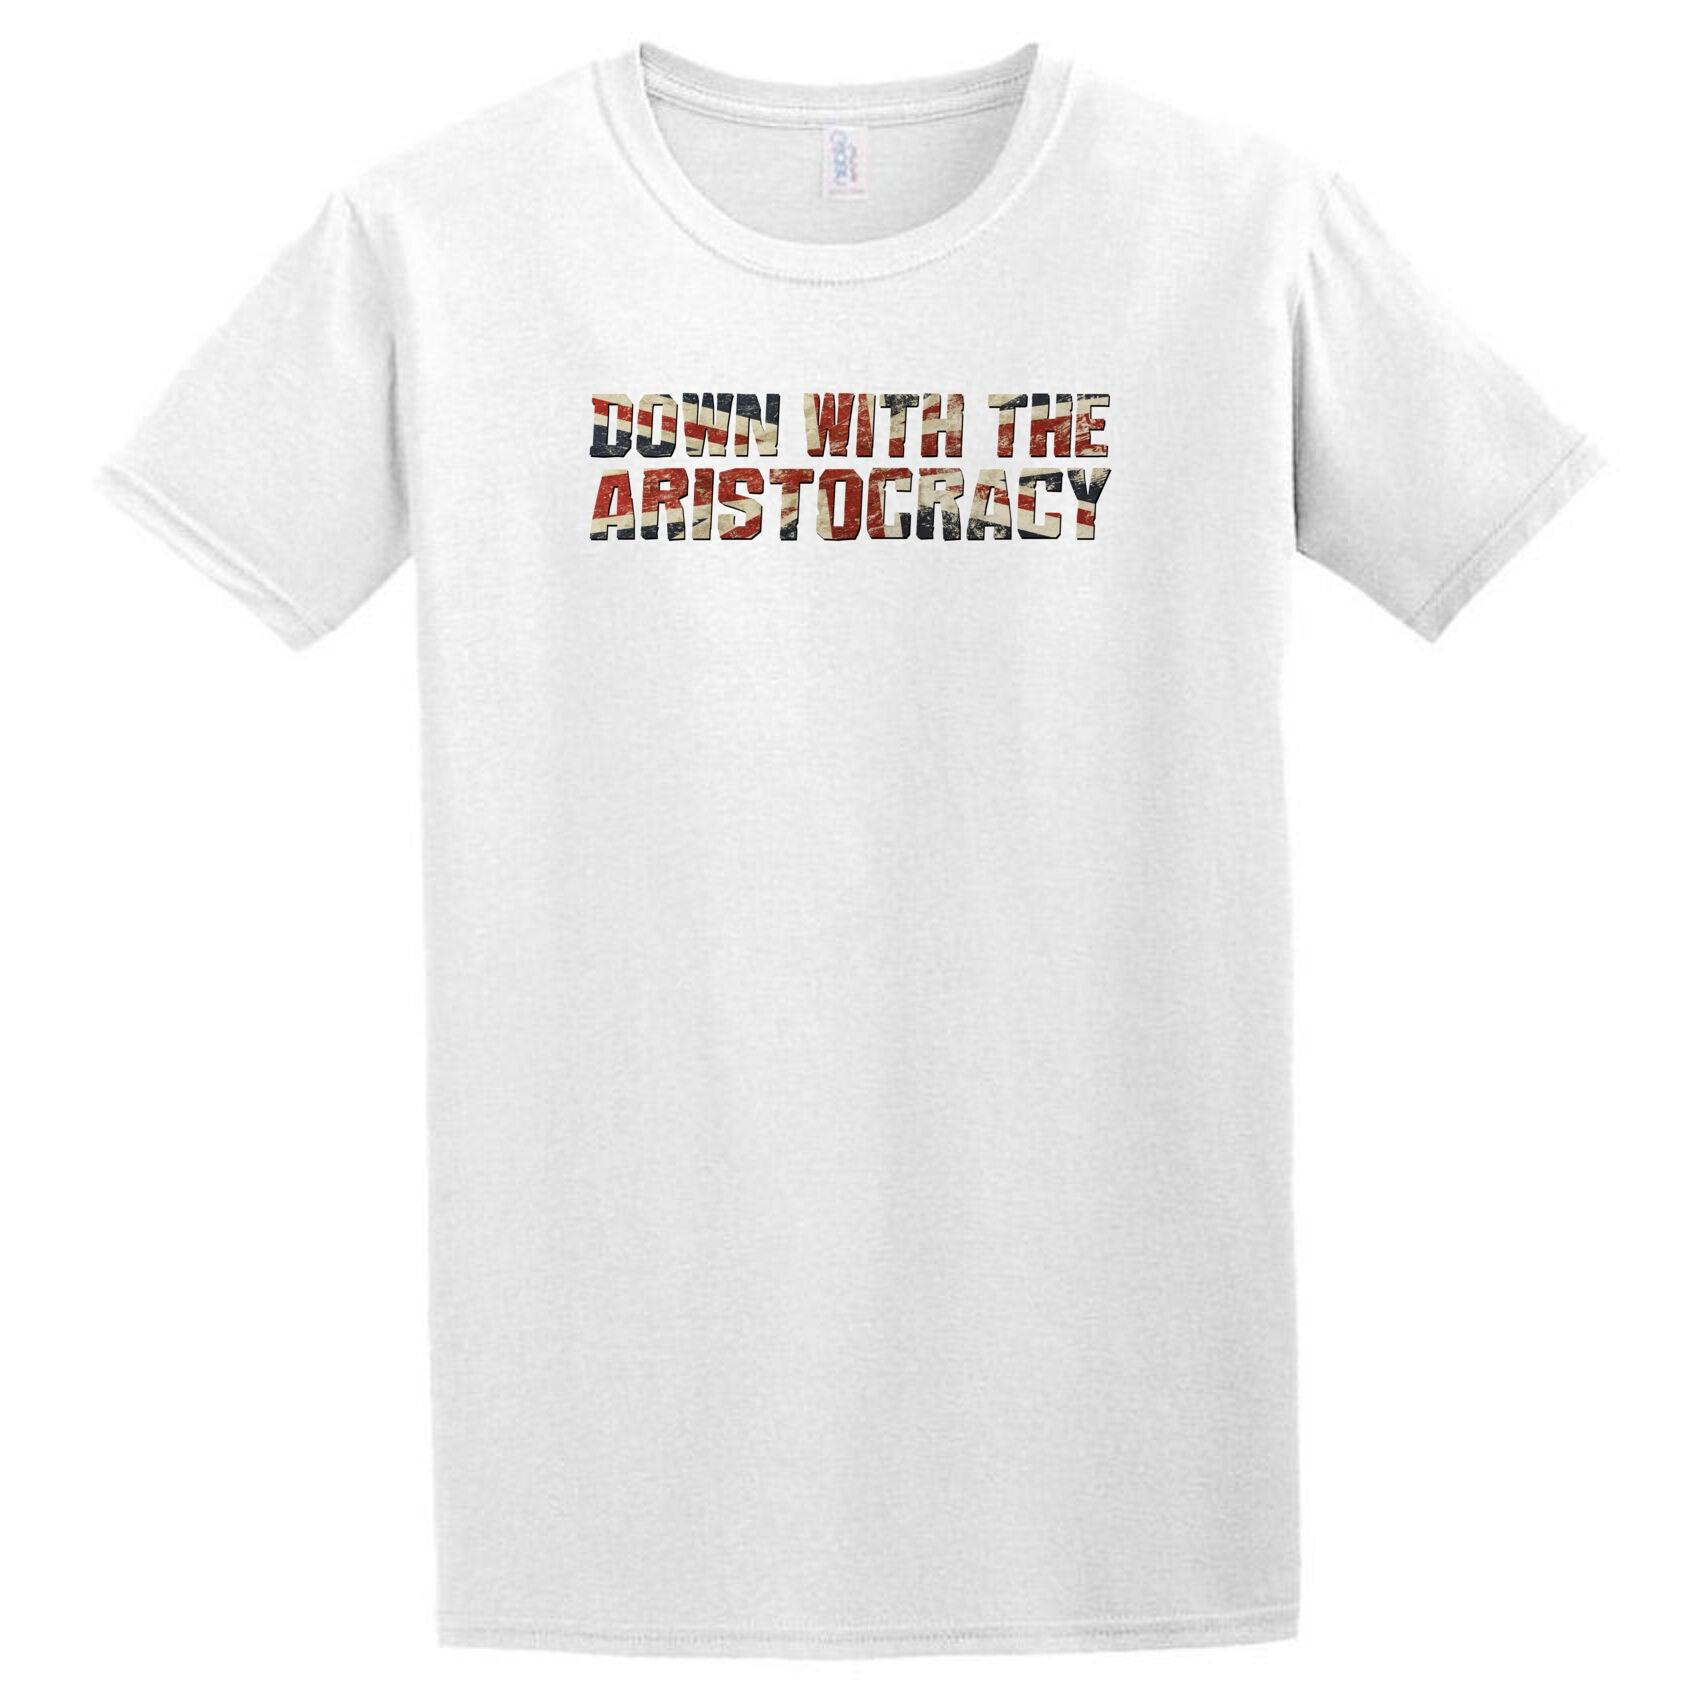 A Twisted Gifts Aristocracy T-Shirt with the words 'get with the times' printed on it. Perfect for political junkies interested in challenging the monarchy system.